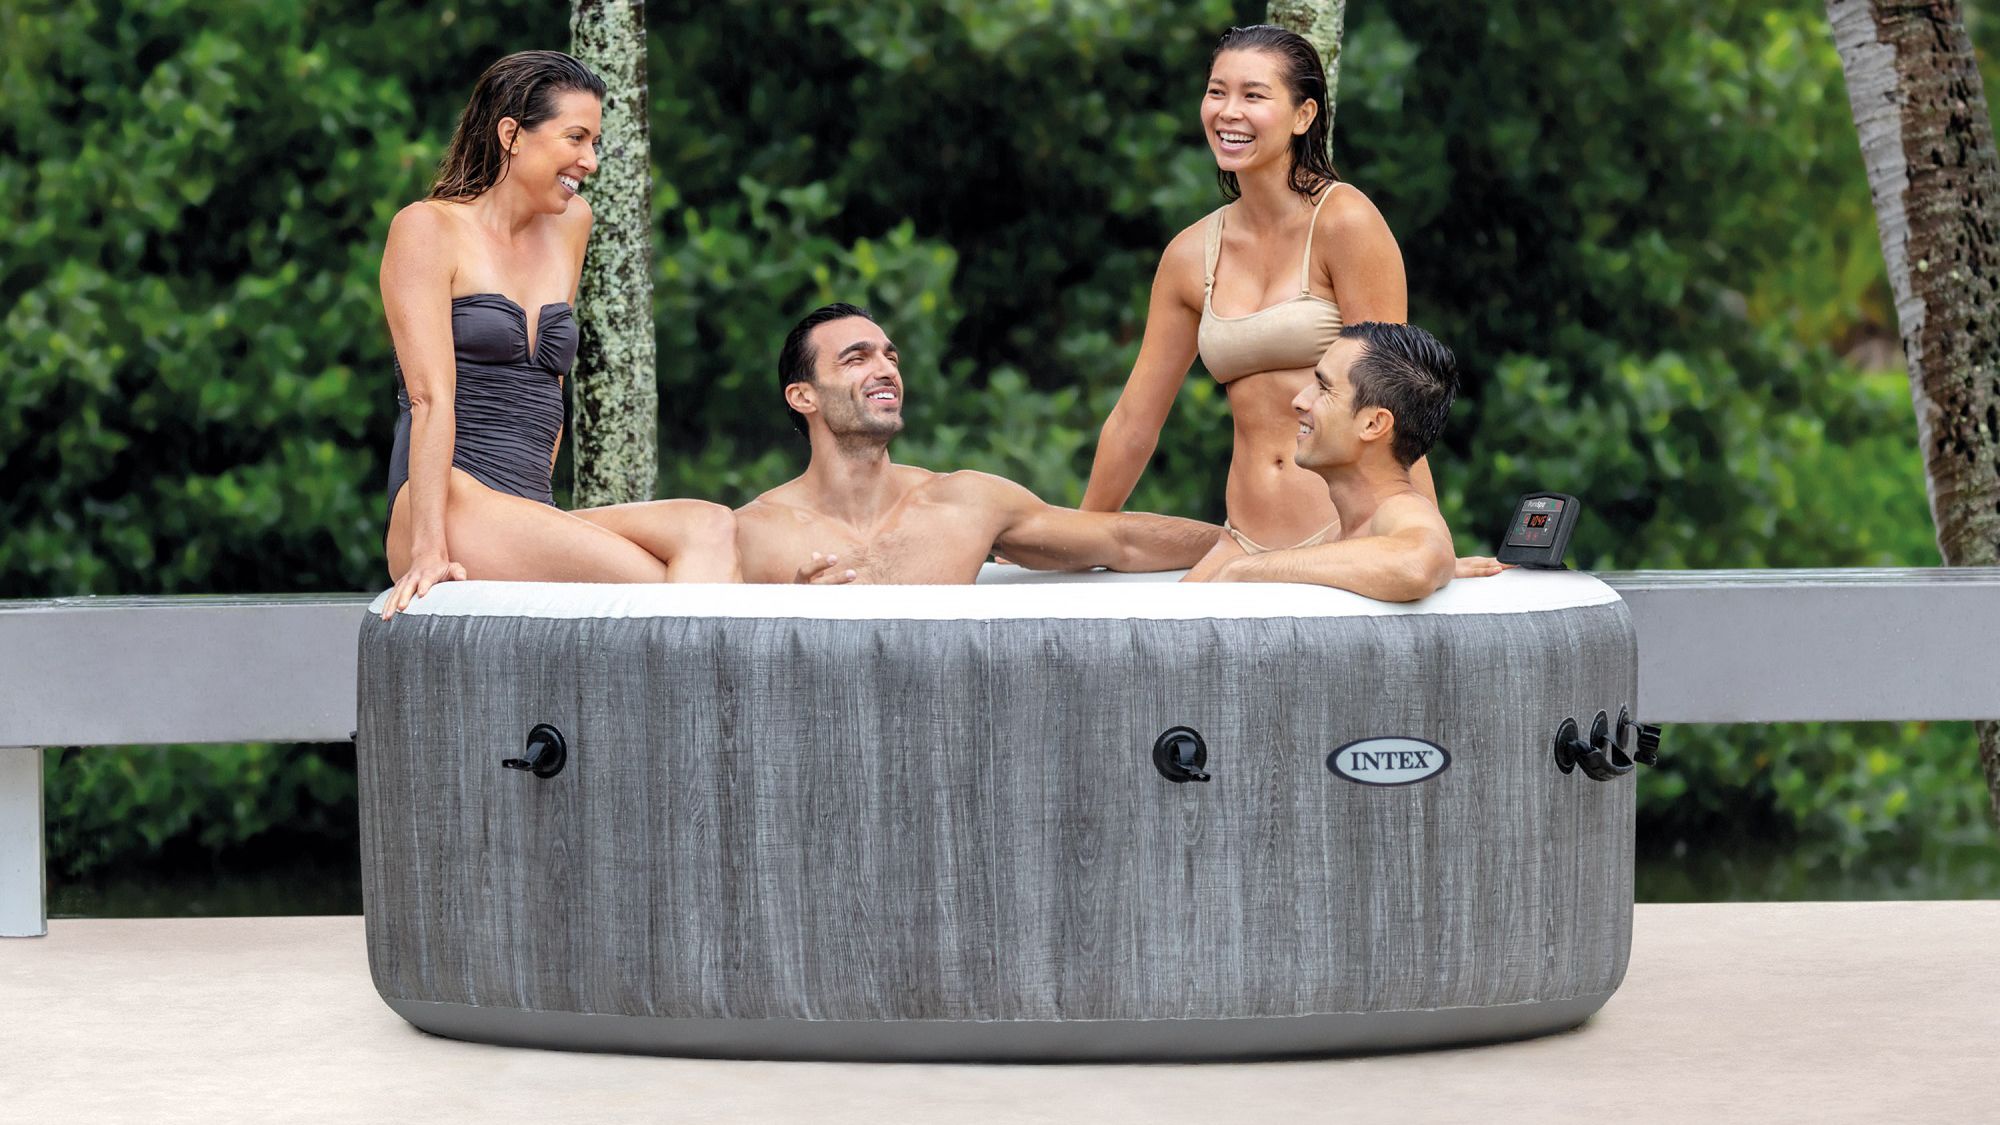 Hot Tub Prices - Affordable Hot Tubs for Entertainment and Relaxation